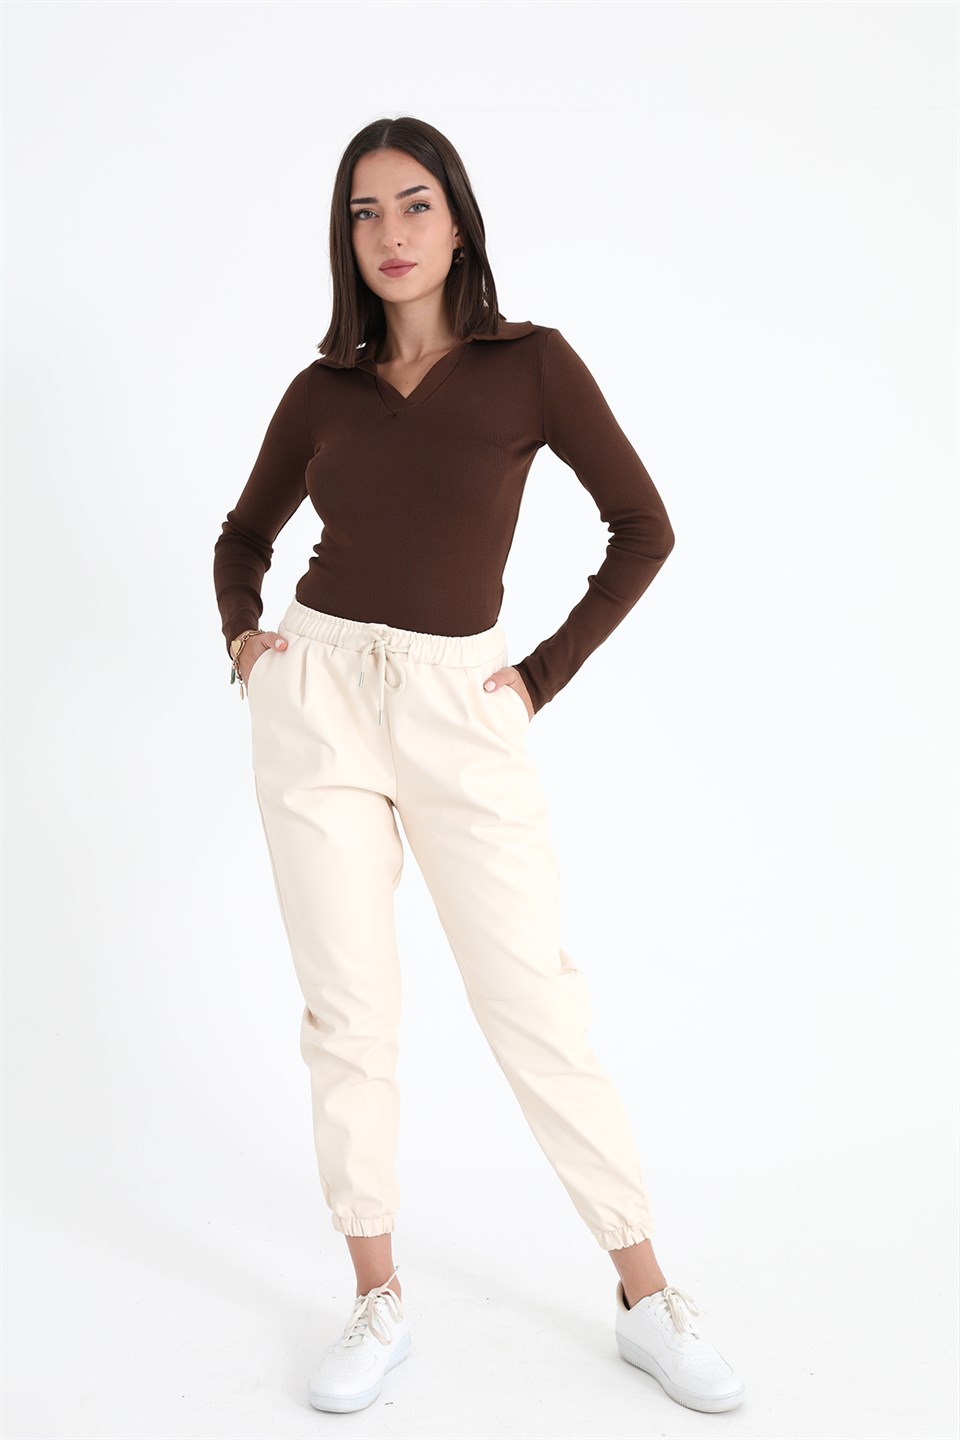 Women's Pleated Leather Pants with Elastic Waist and Legs - Ecru - STREETMODE™